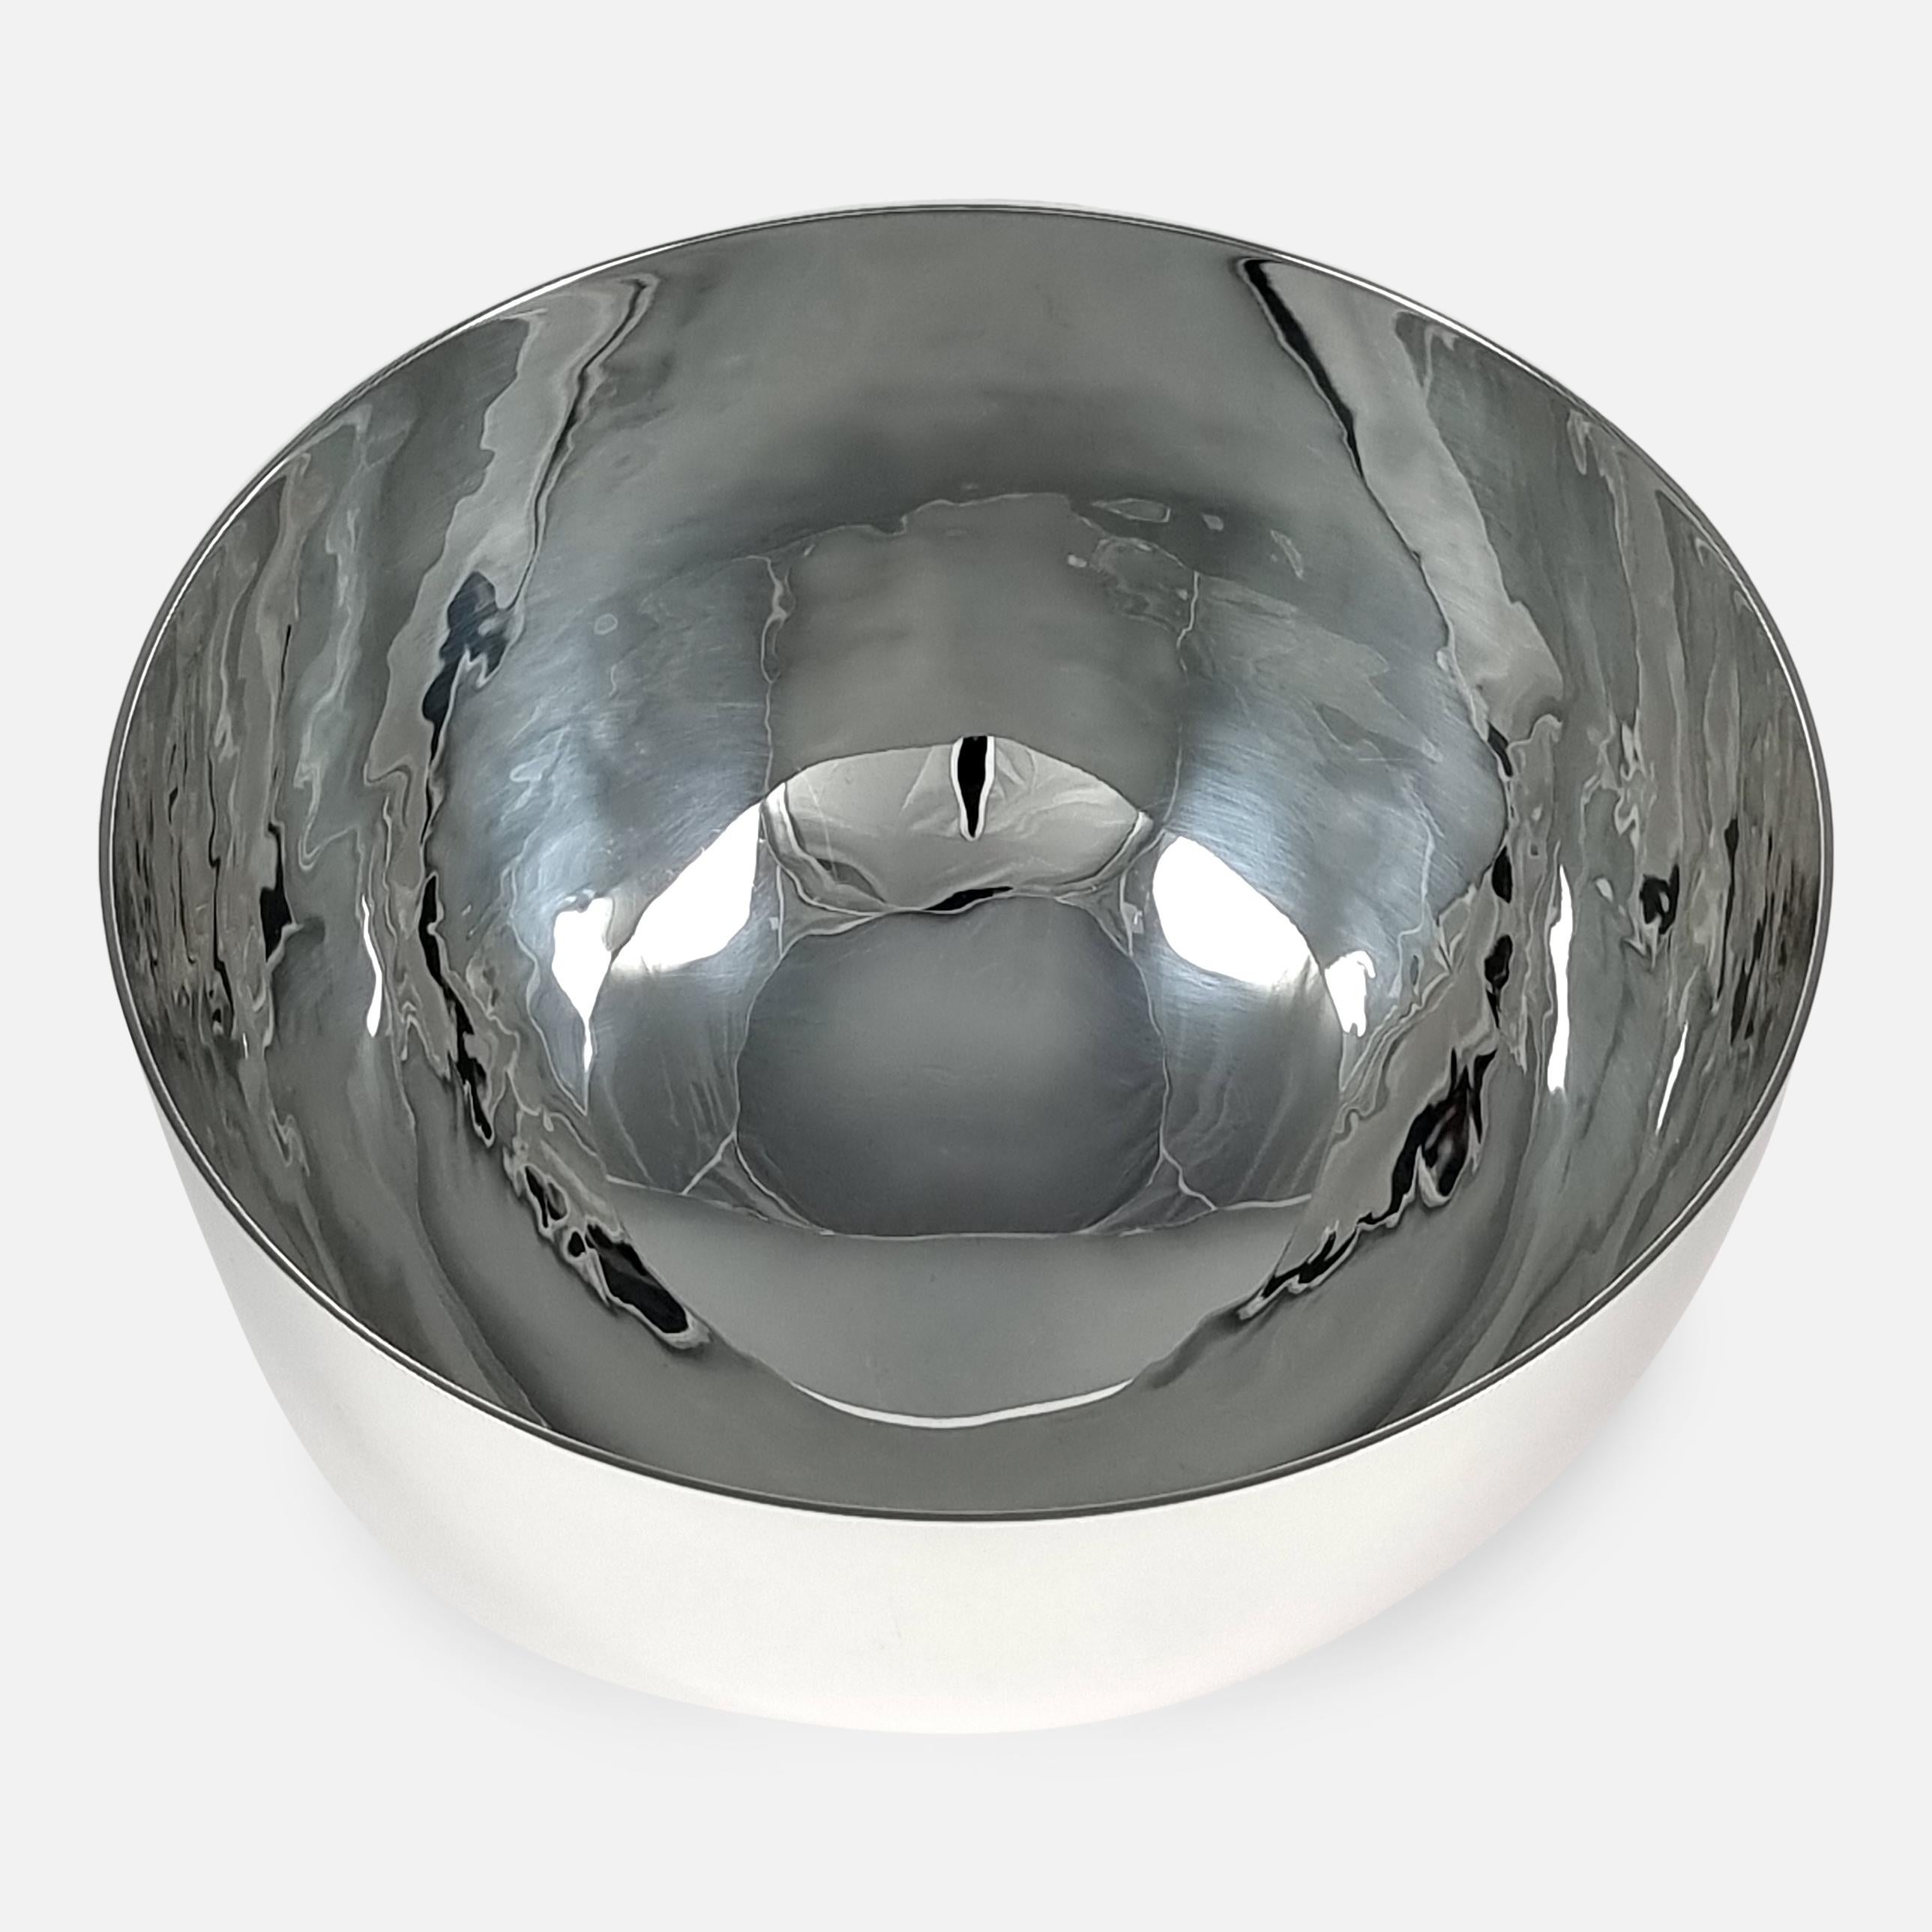 Elizabeth II Sterling Silver Tumble Fruit Bowl, William & Son, 2015 In Good Condition For Sale In Glasgow, GB